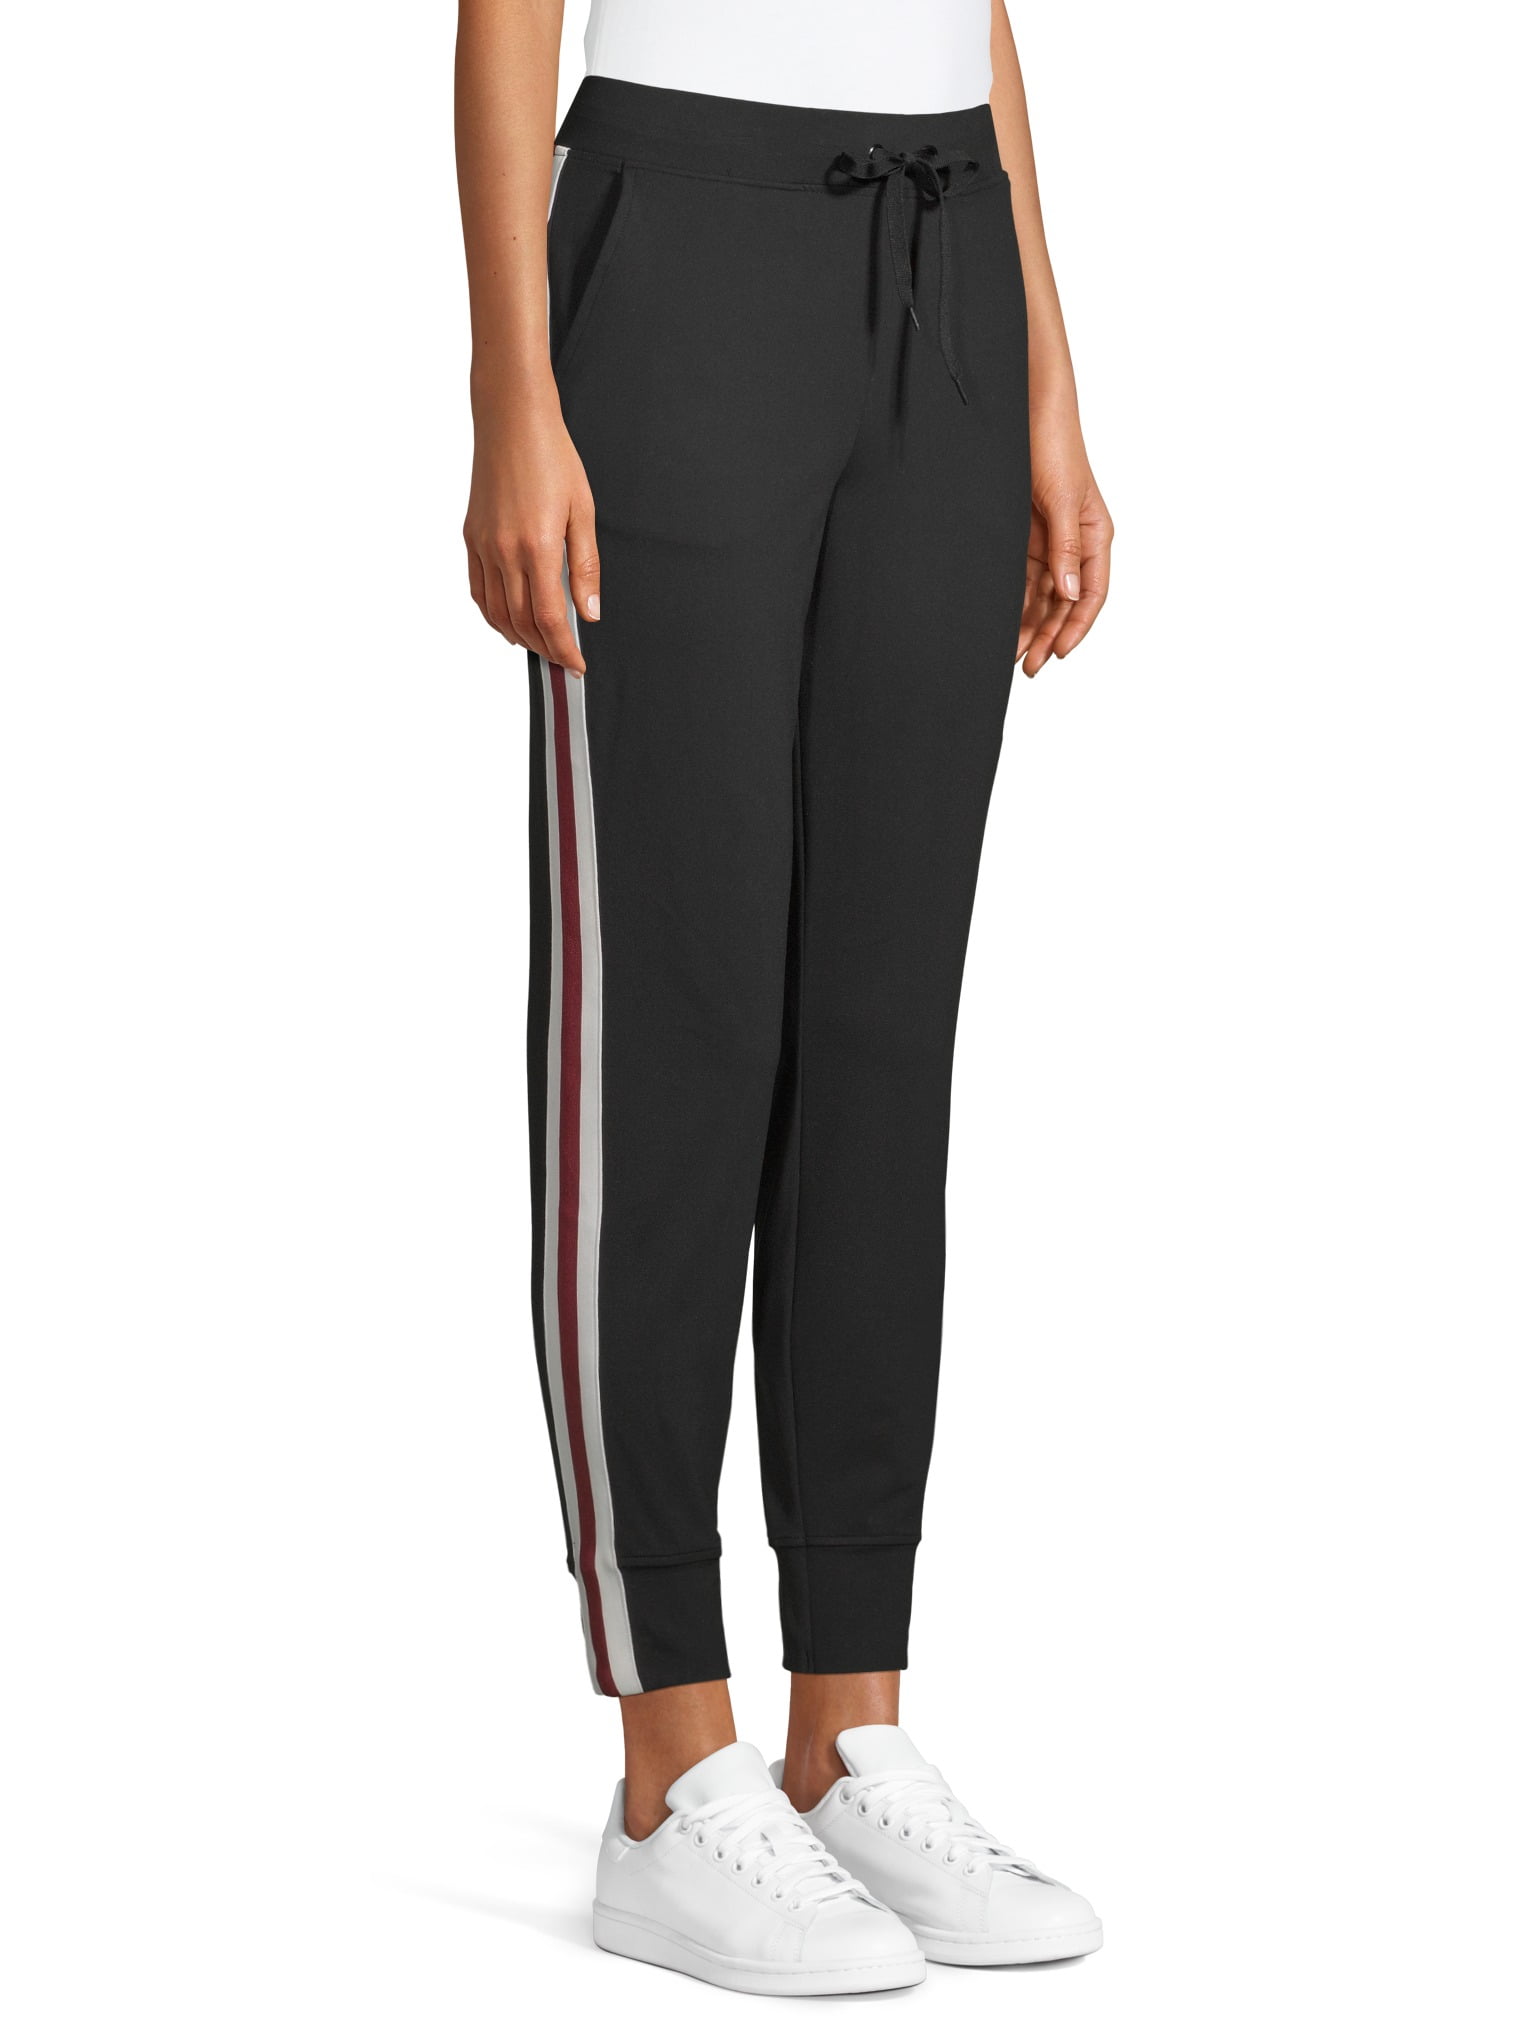 Athletic Works Women's Athleisure Track Pants 